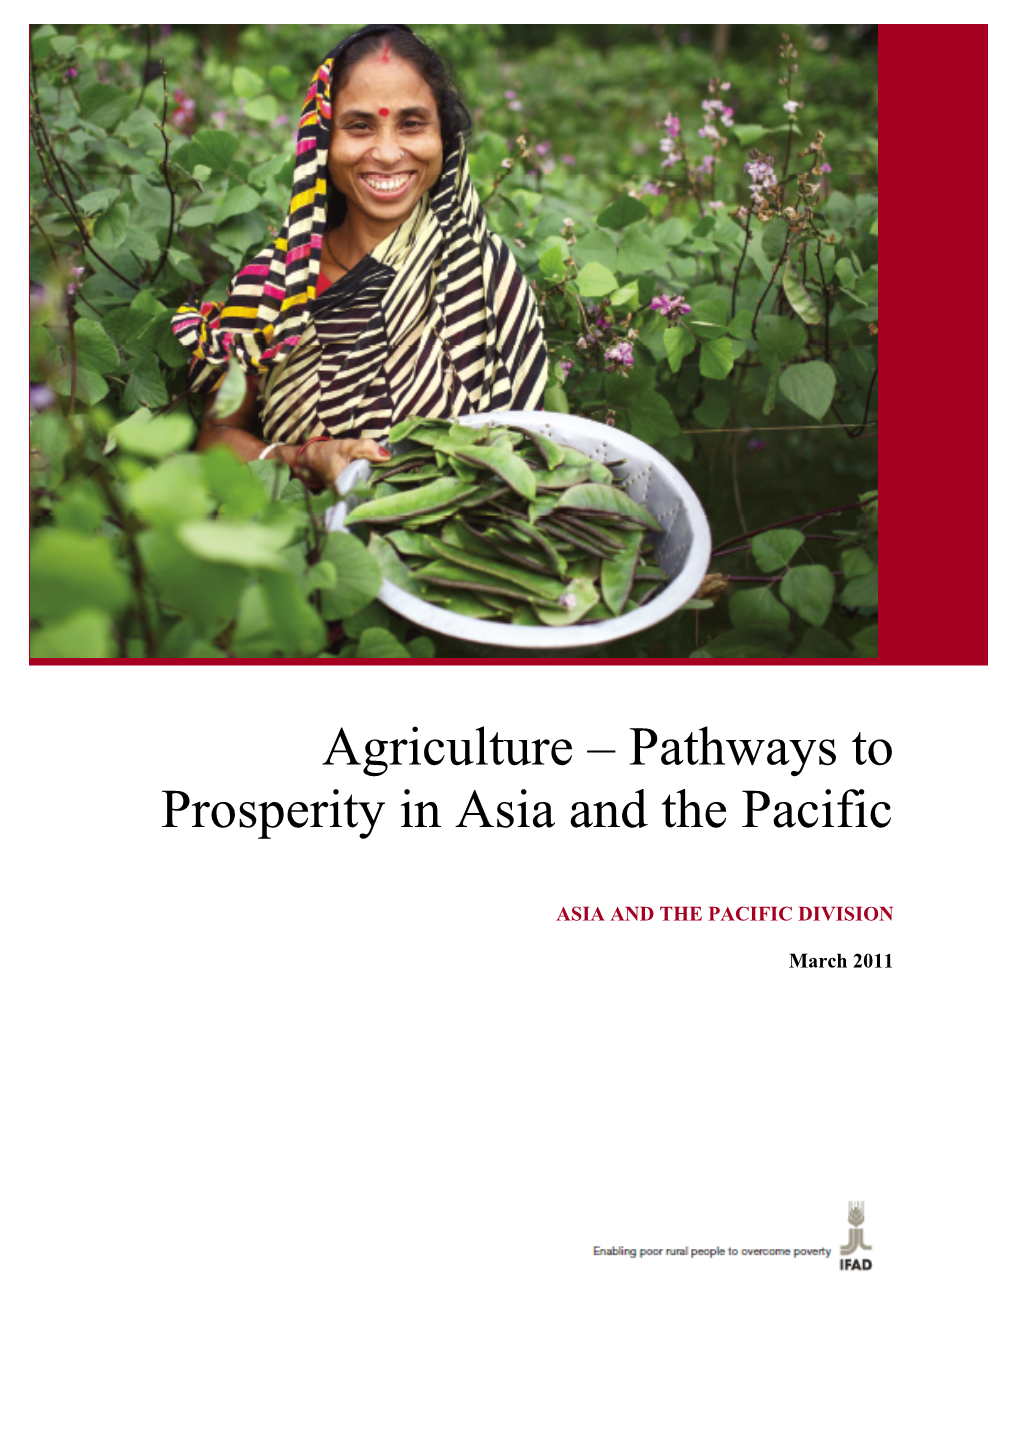 Pathways to Prosperity in Asia and the Pacific